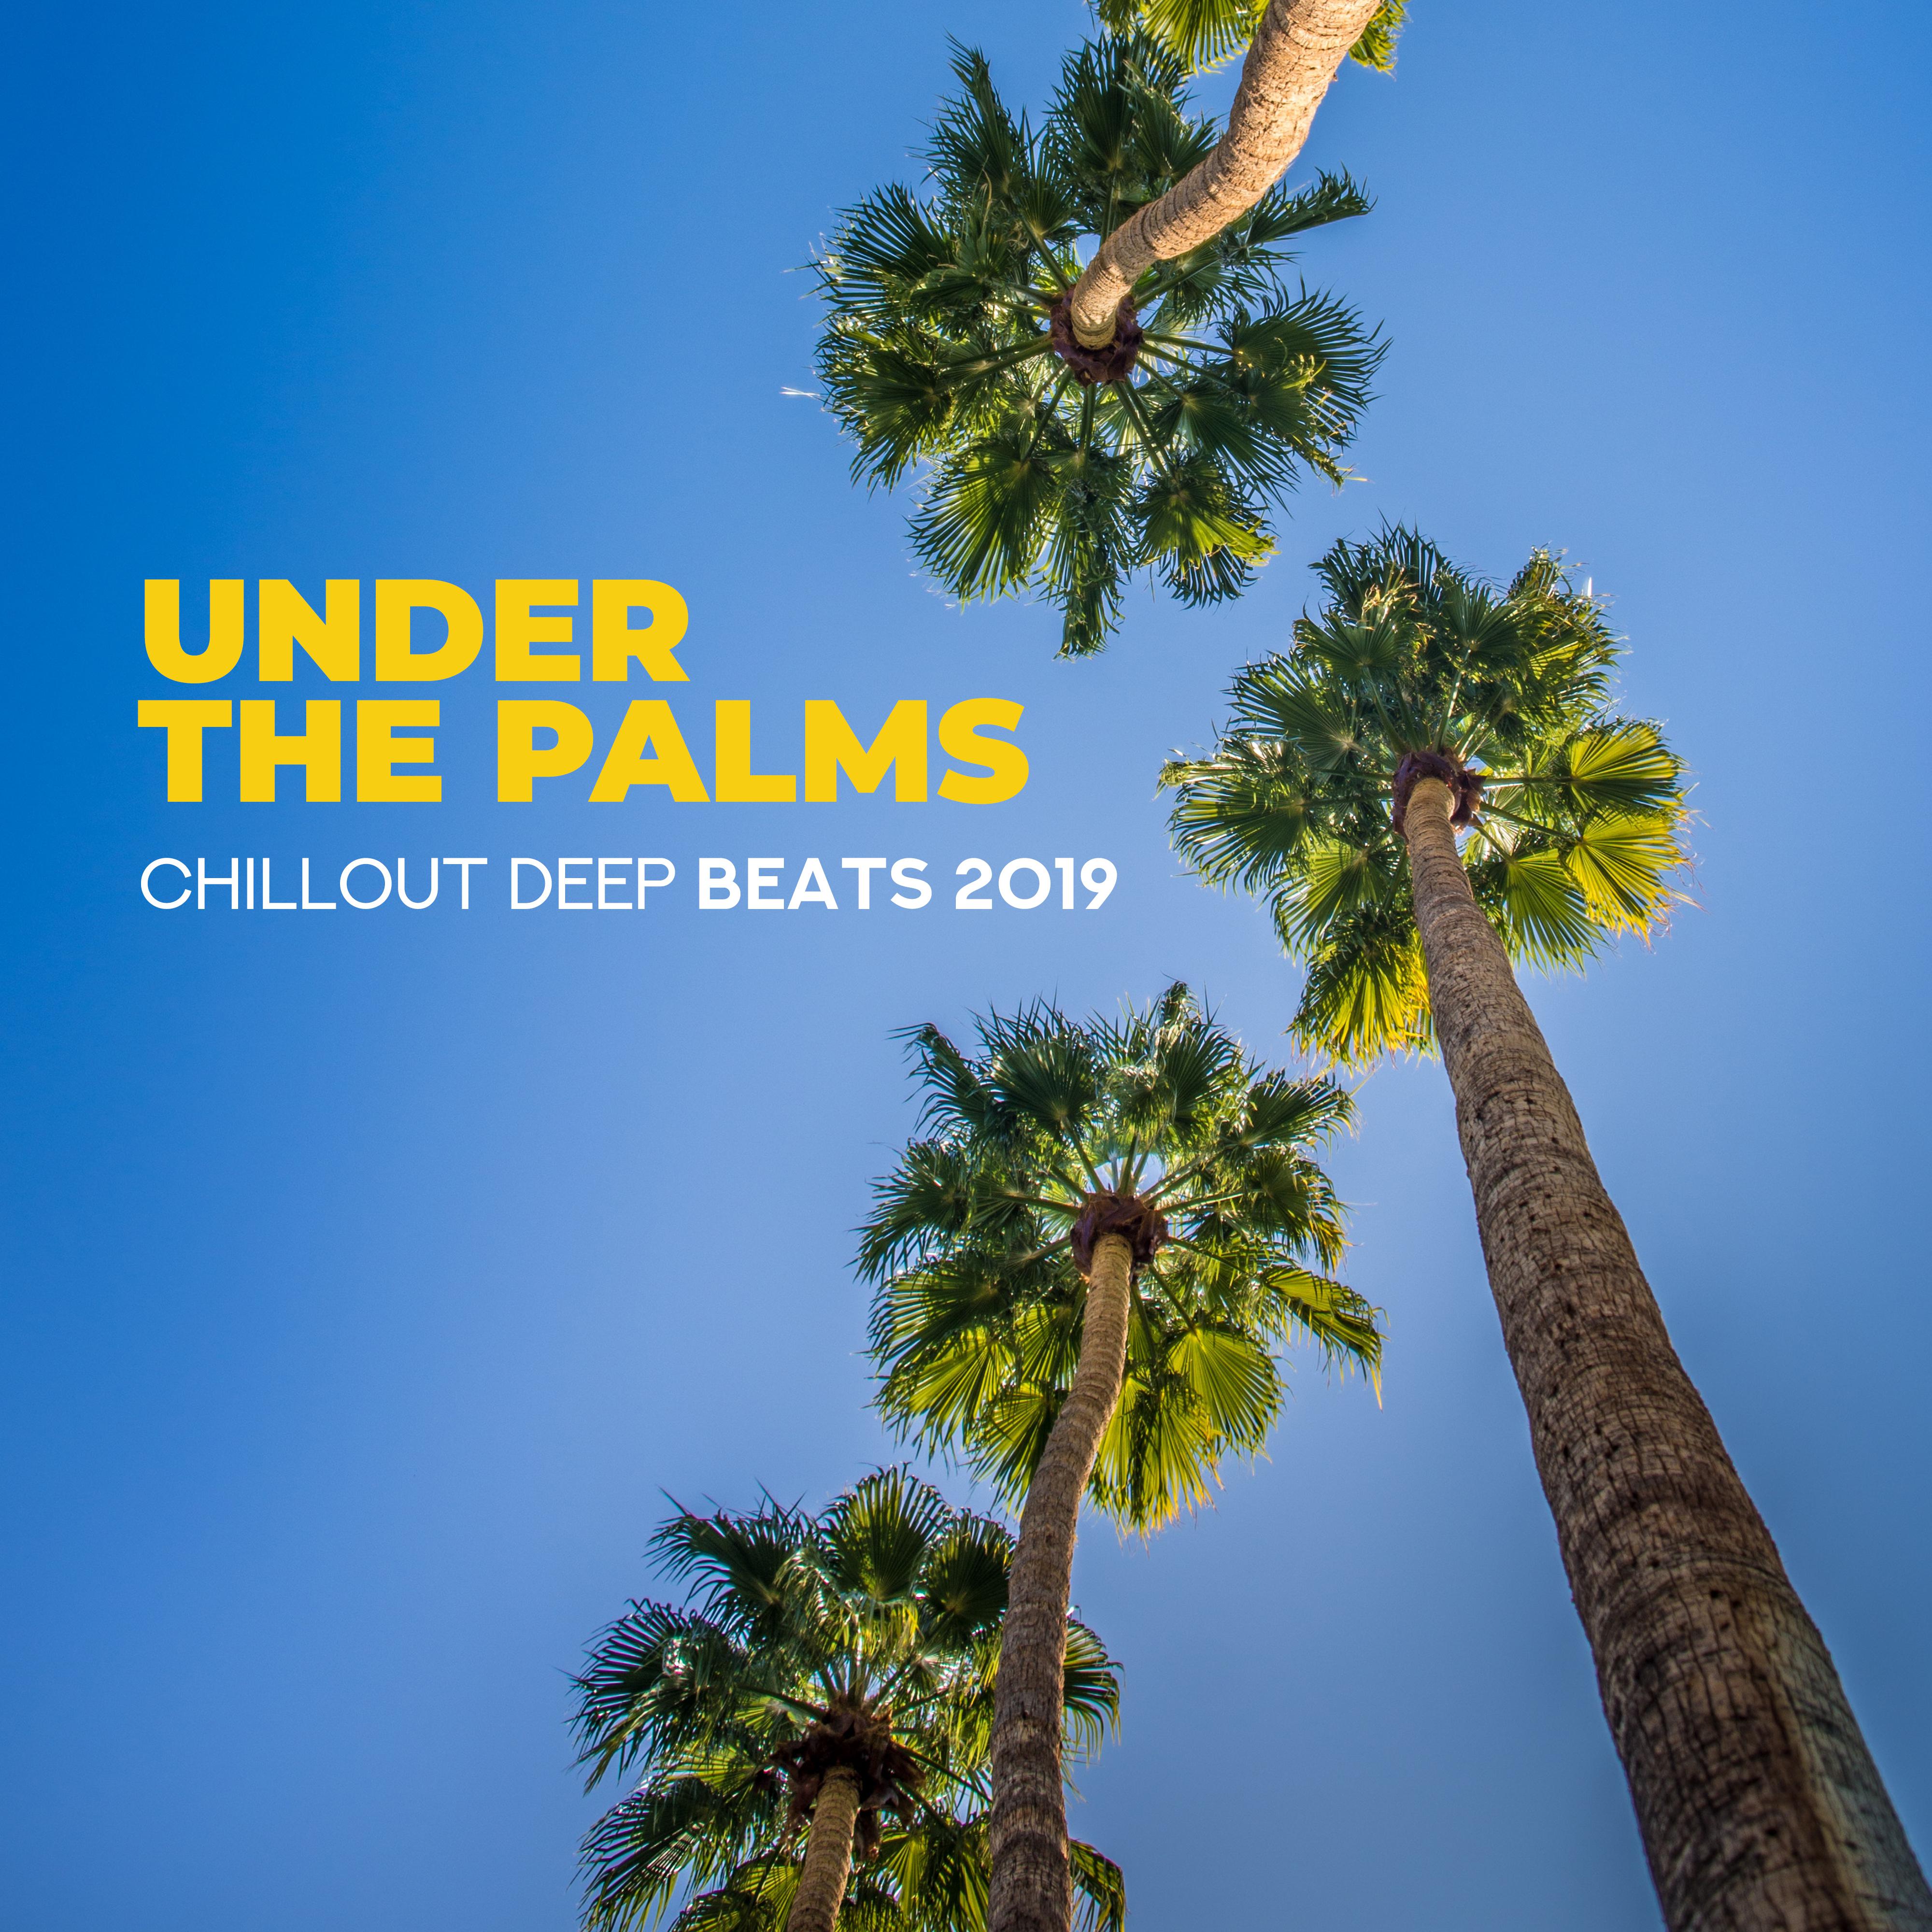 Under the Palms Chillout Deep Beats 2019